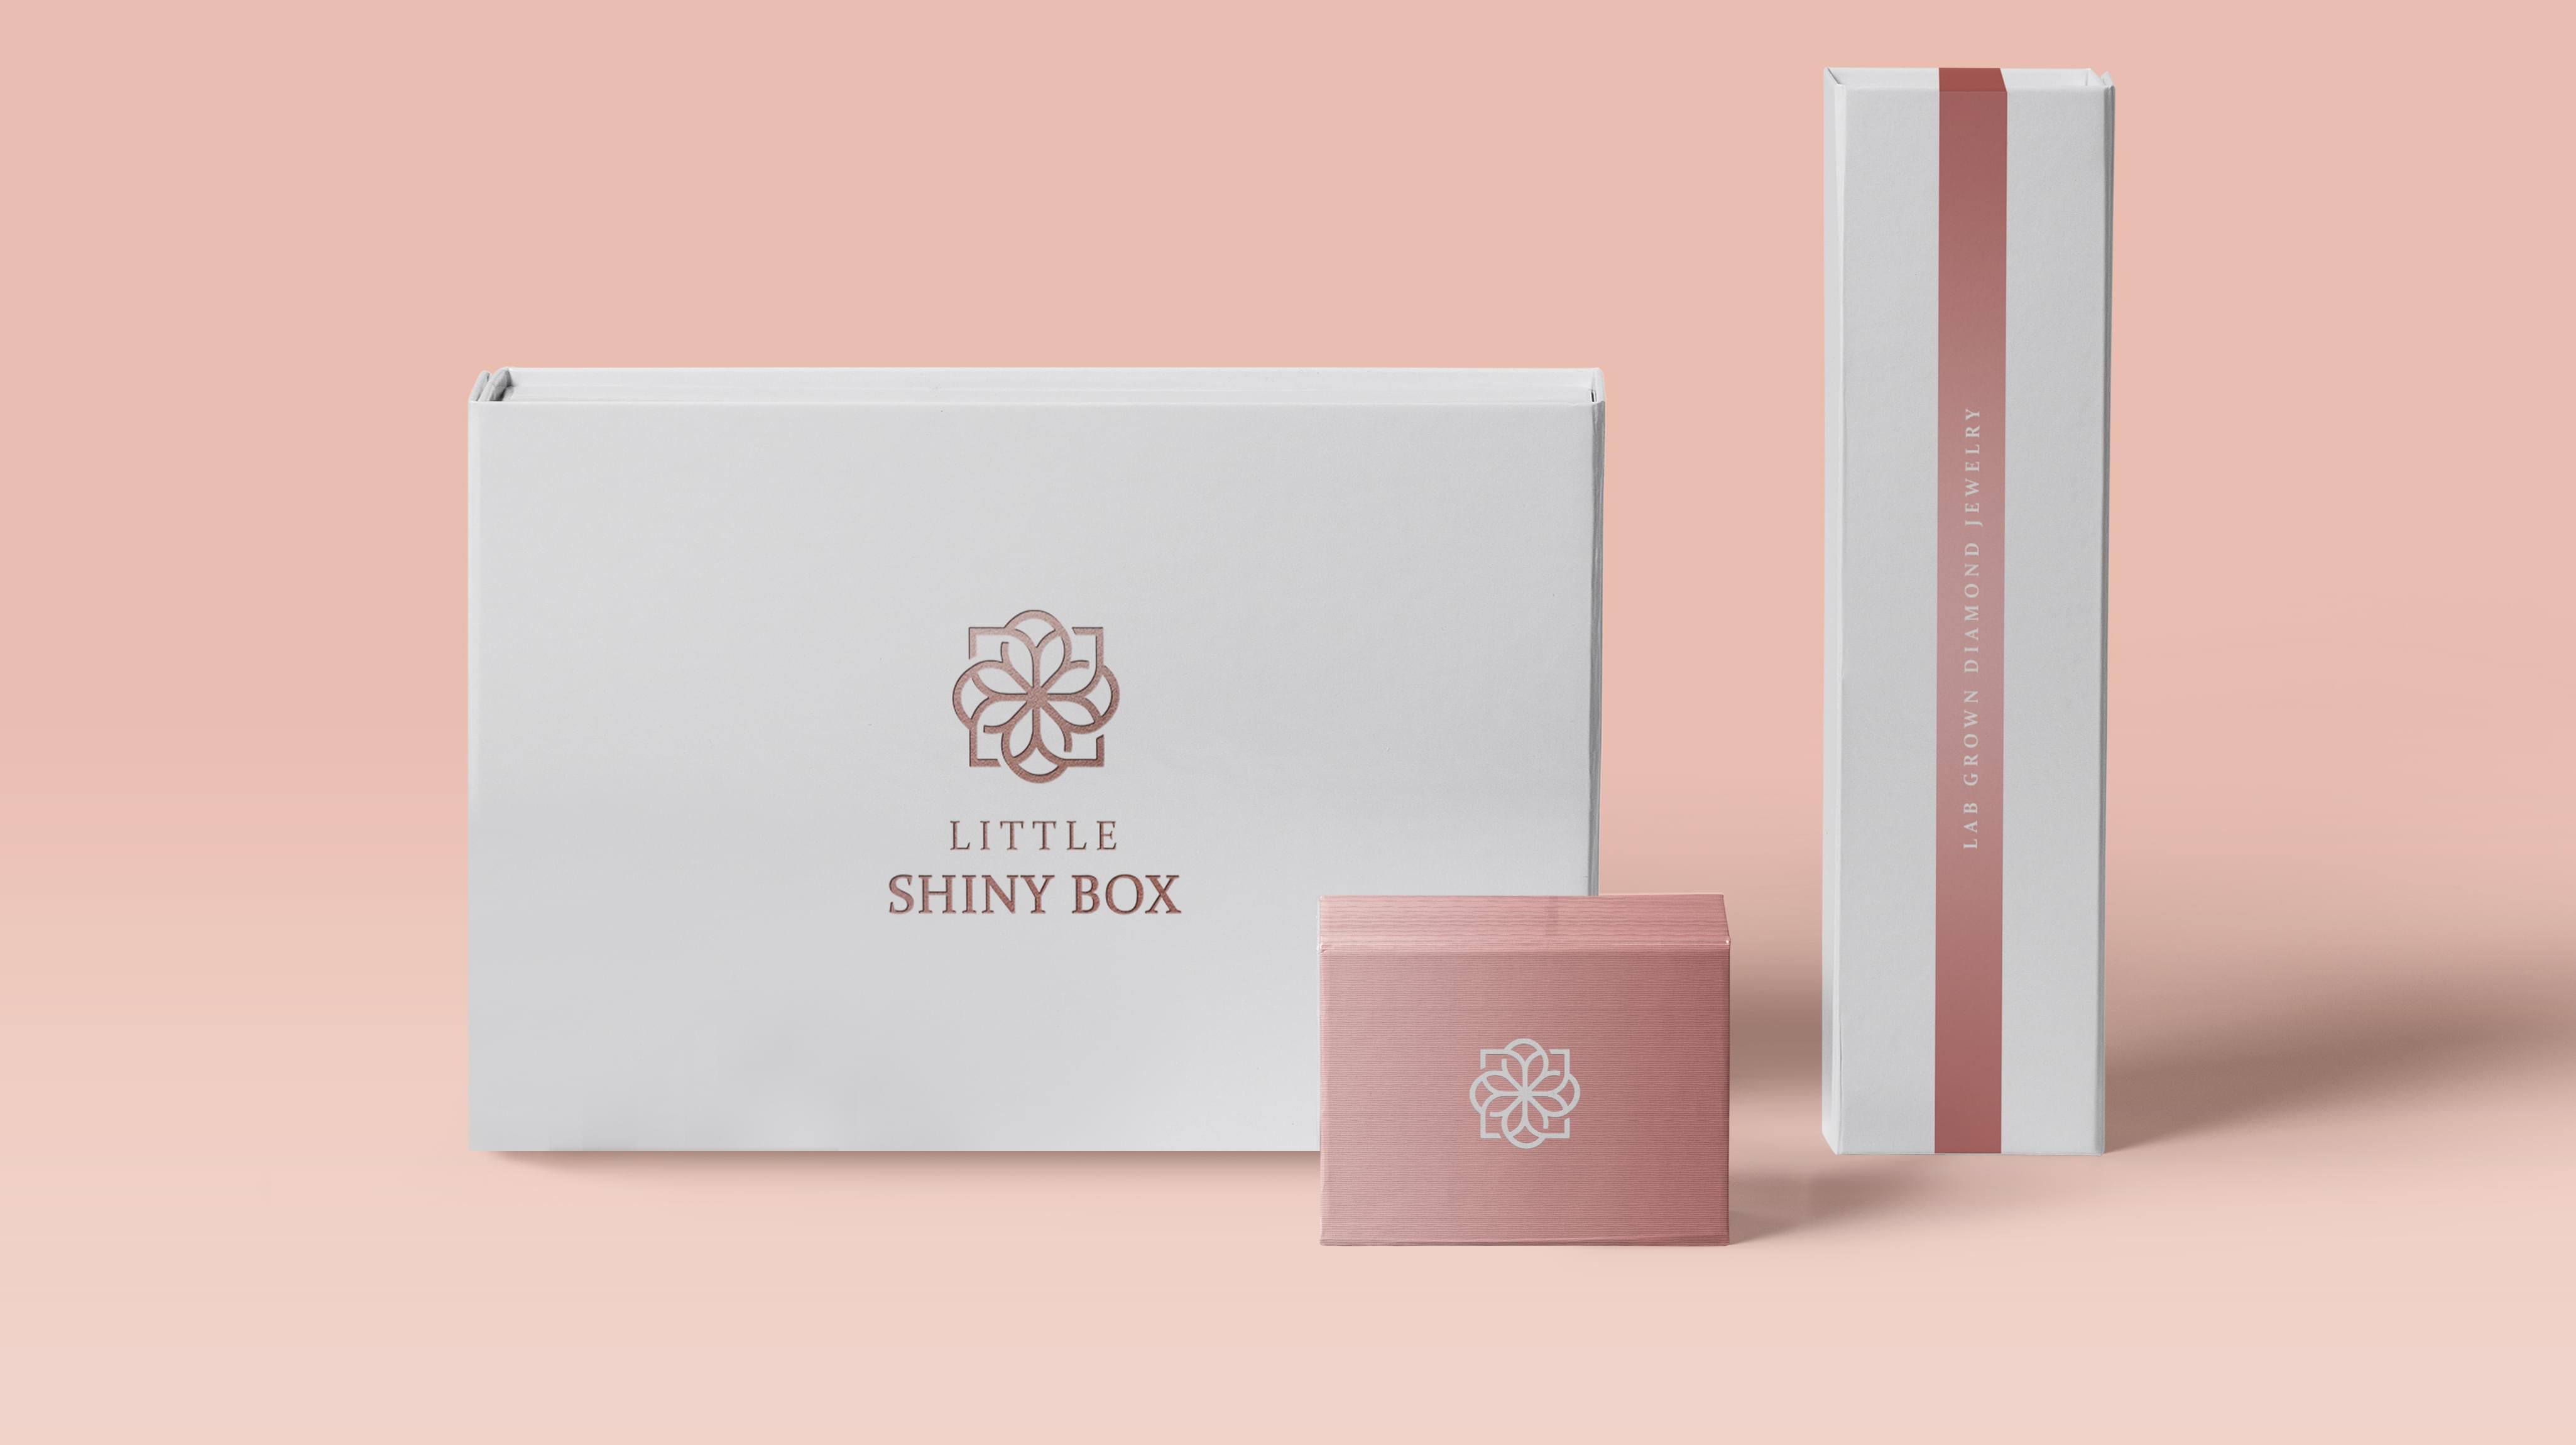 LITTLE SHINY BOX Packaging